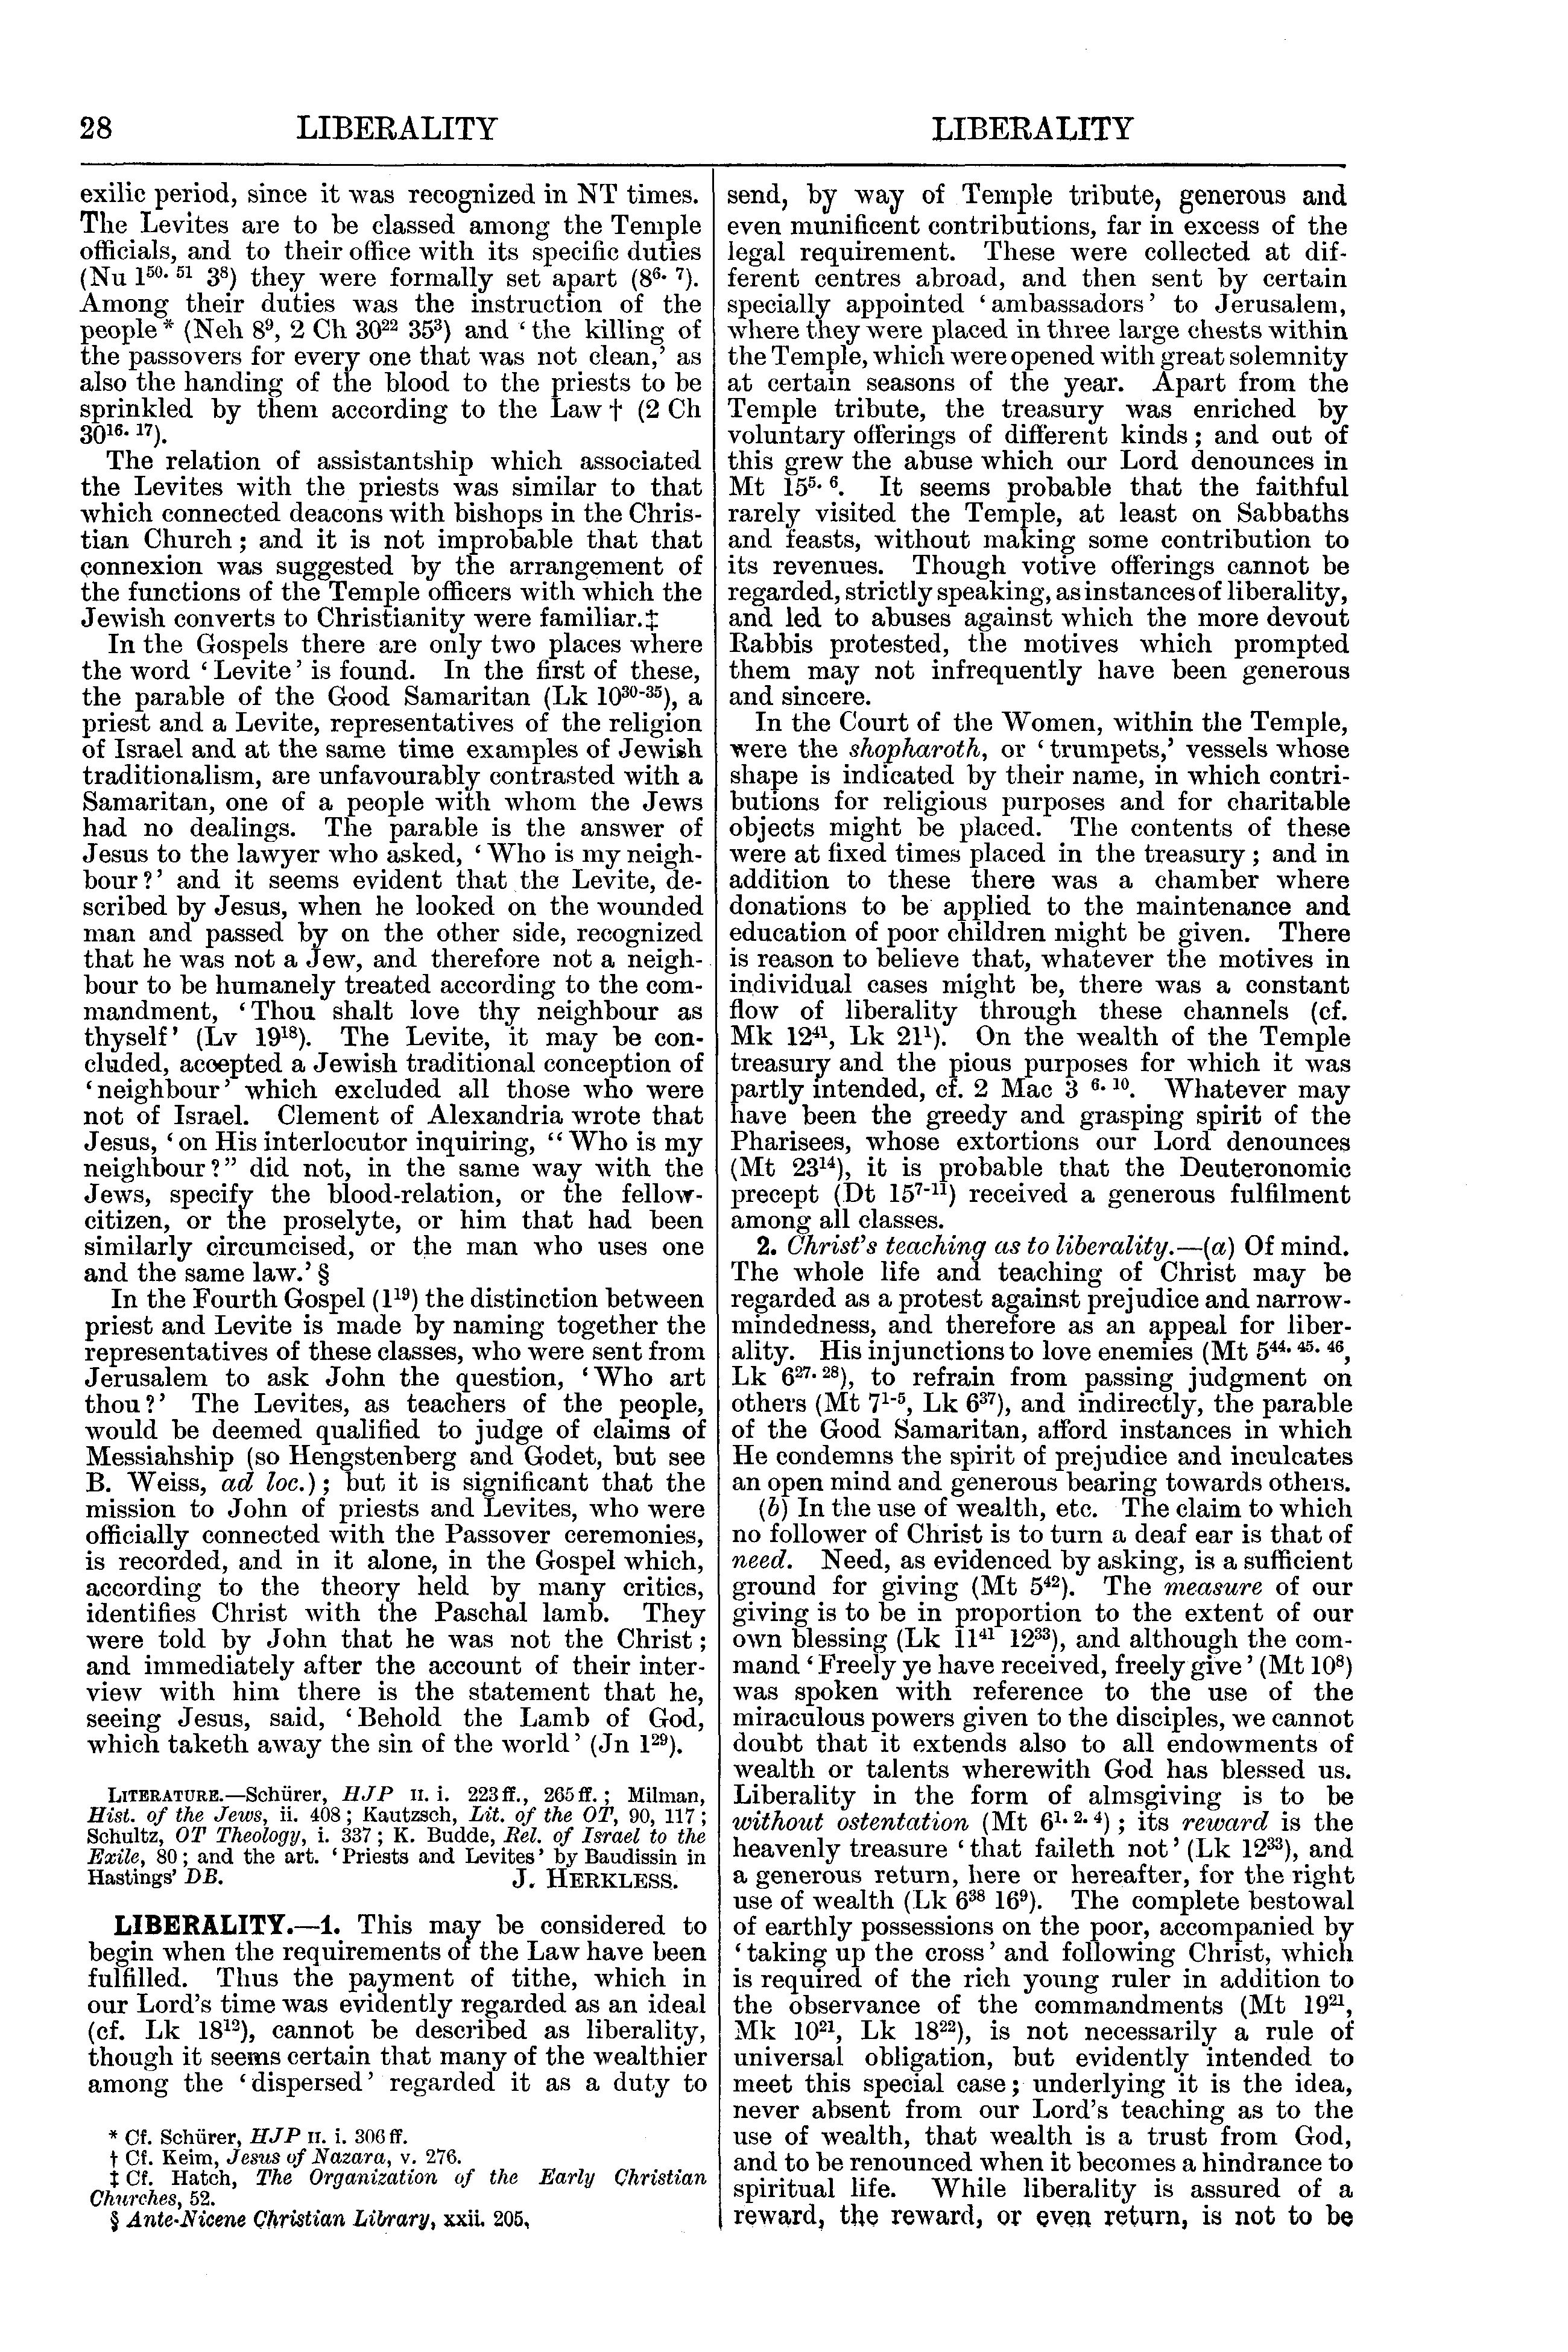 Image of page 28